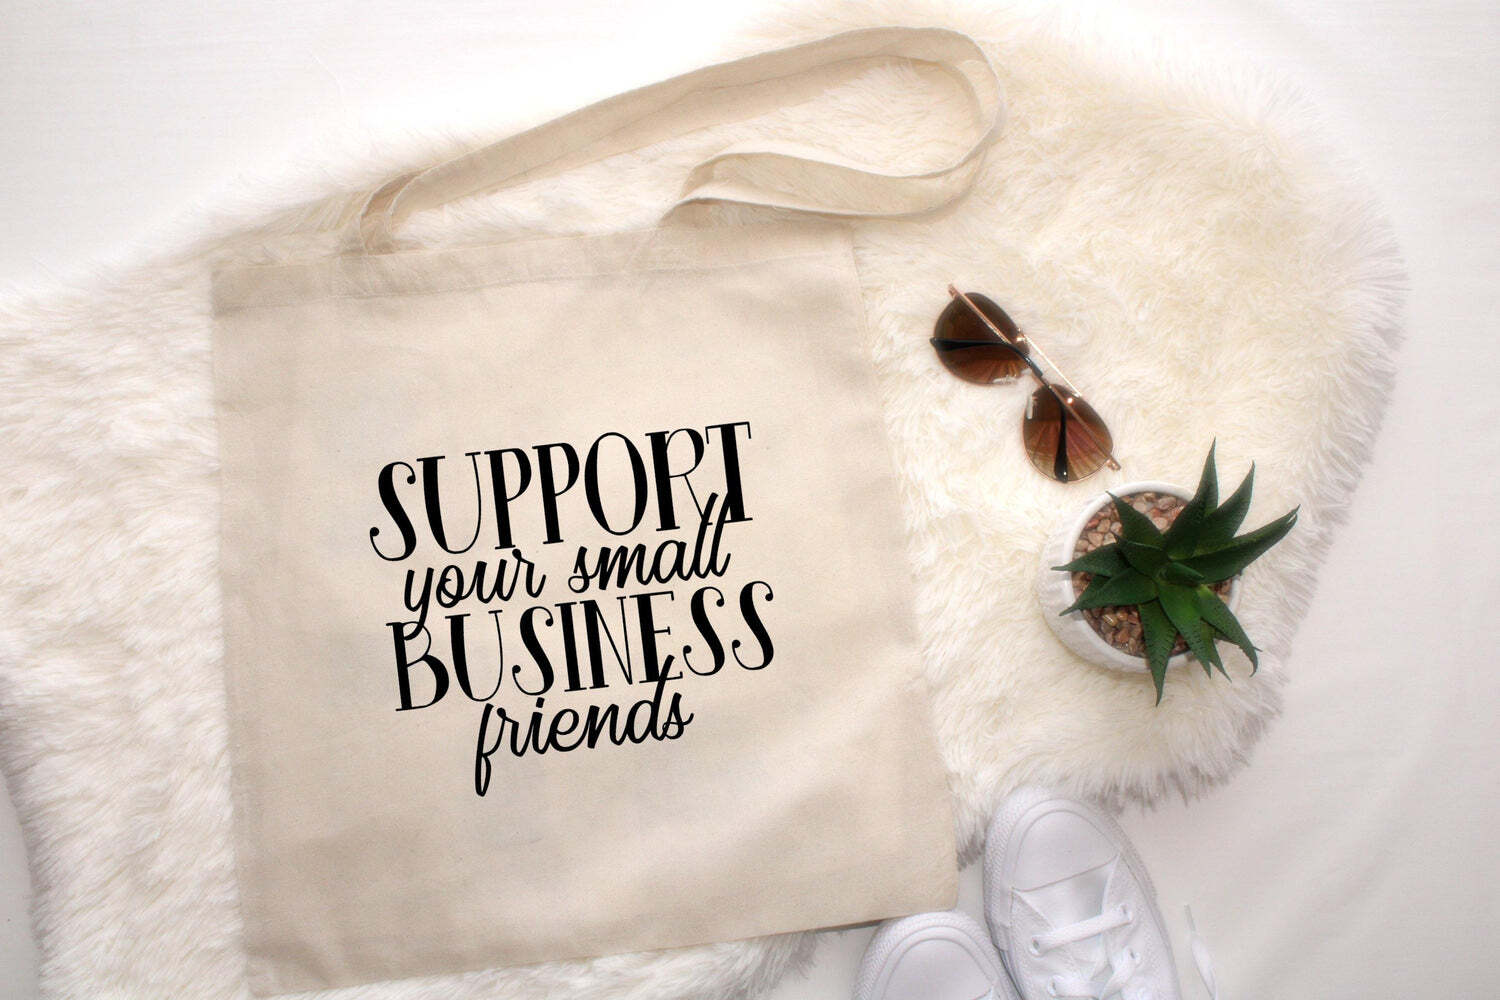 personalized tote bag ideas